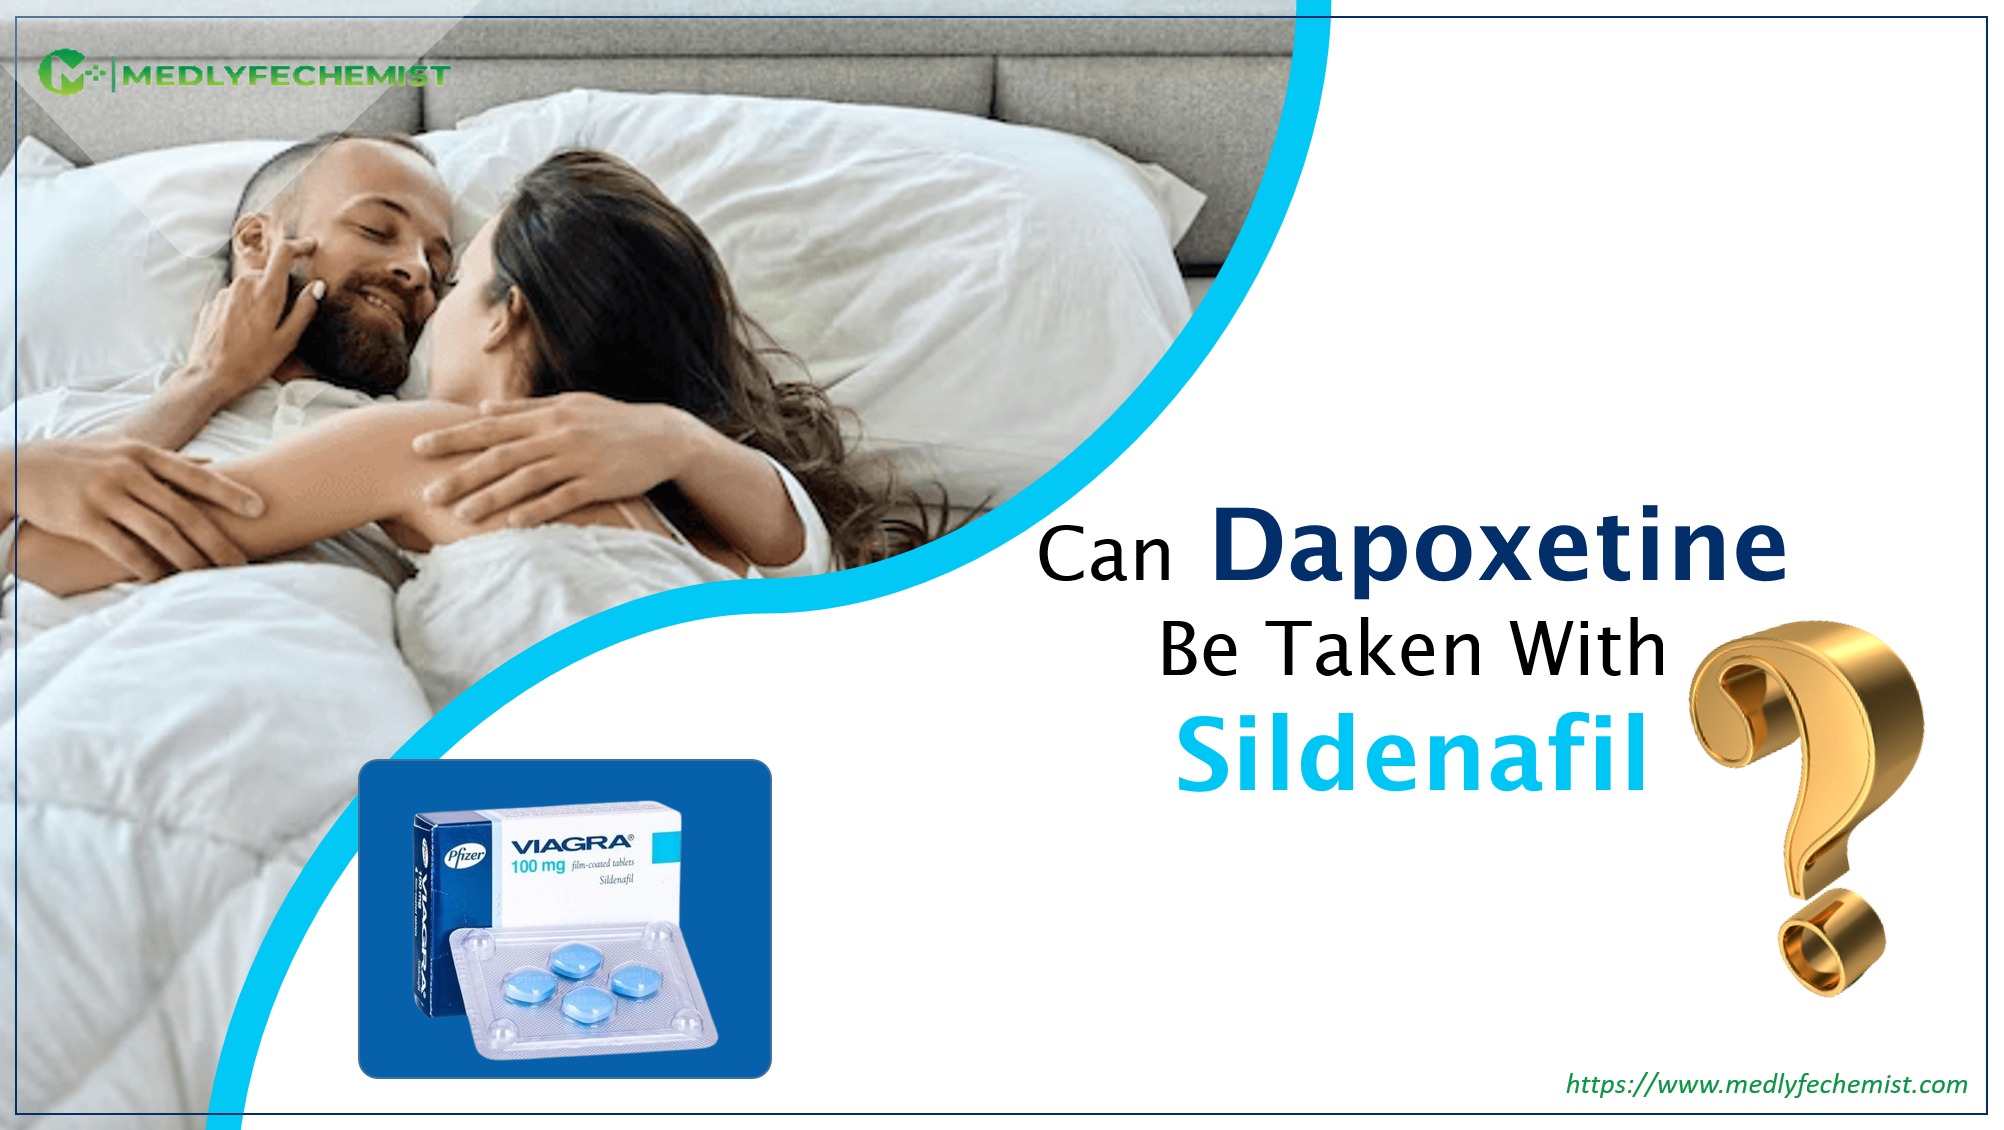 Can Dapoxetine be taken with Sildenafil?